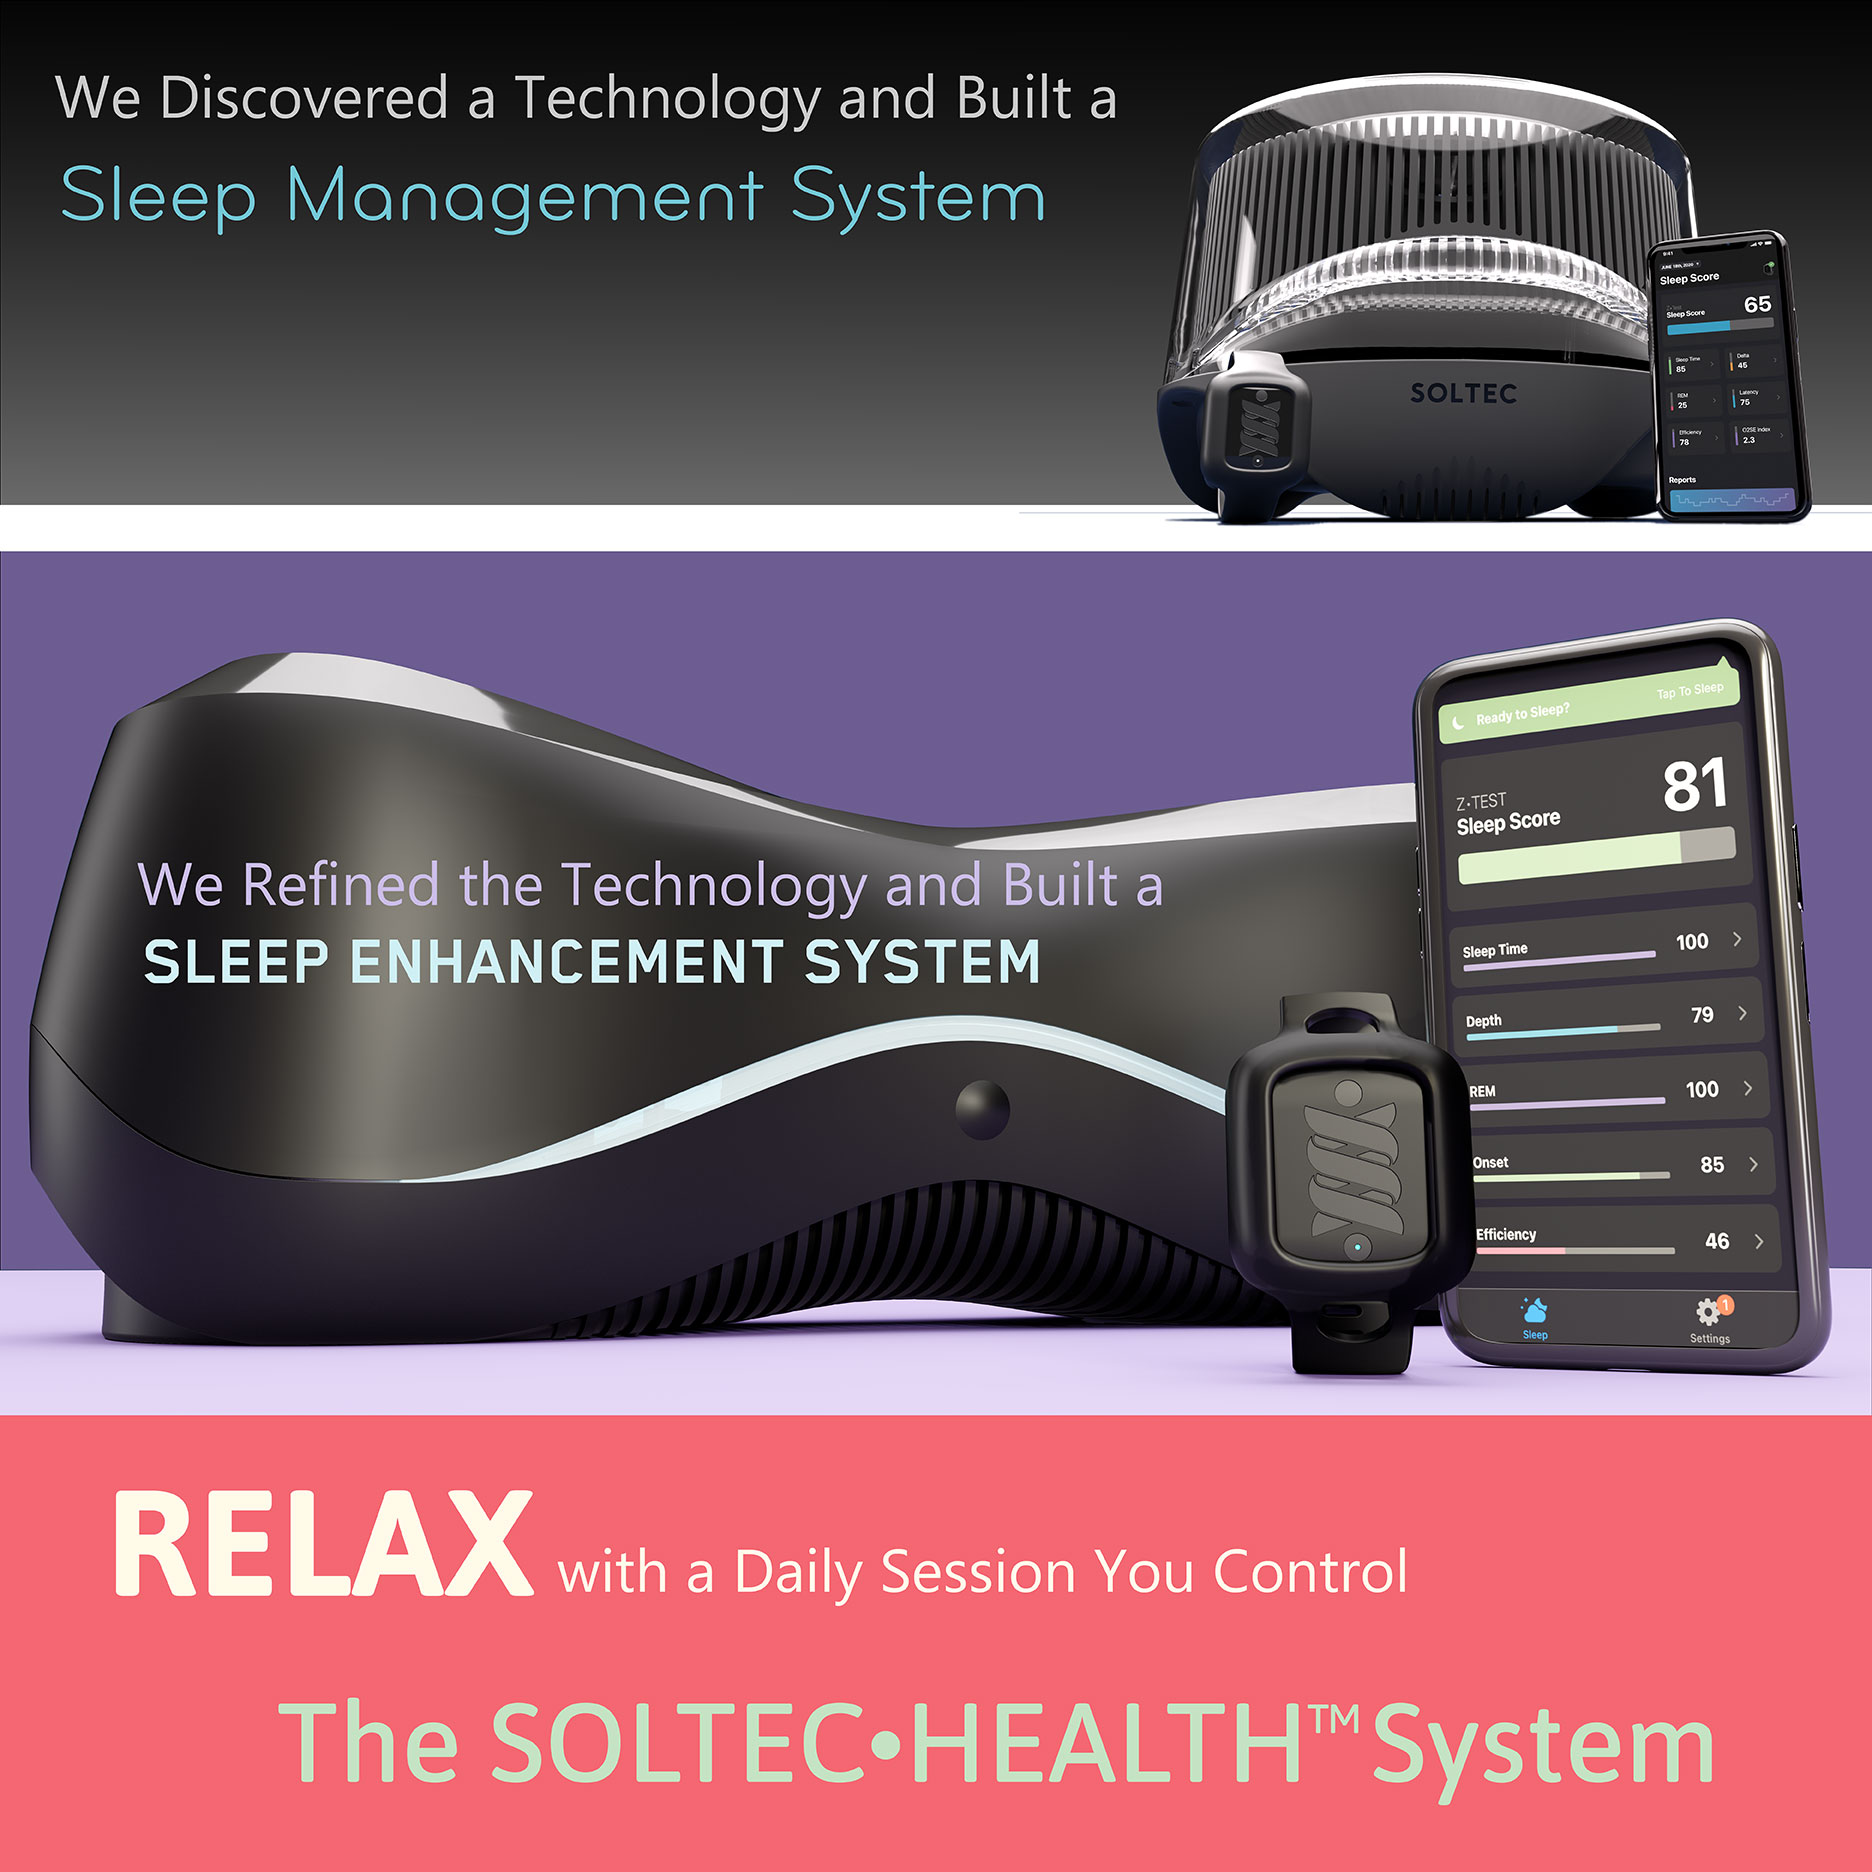 Sleep Management System is now the SOLTEC Sleep Enhancement System image